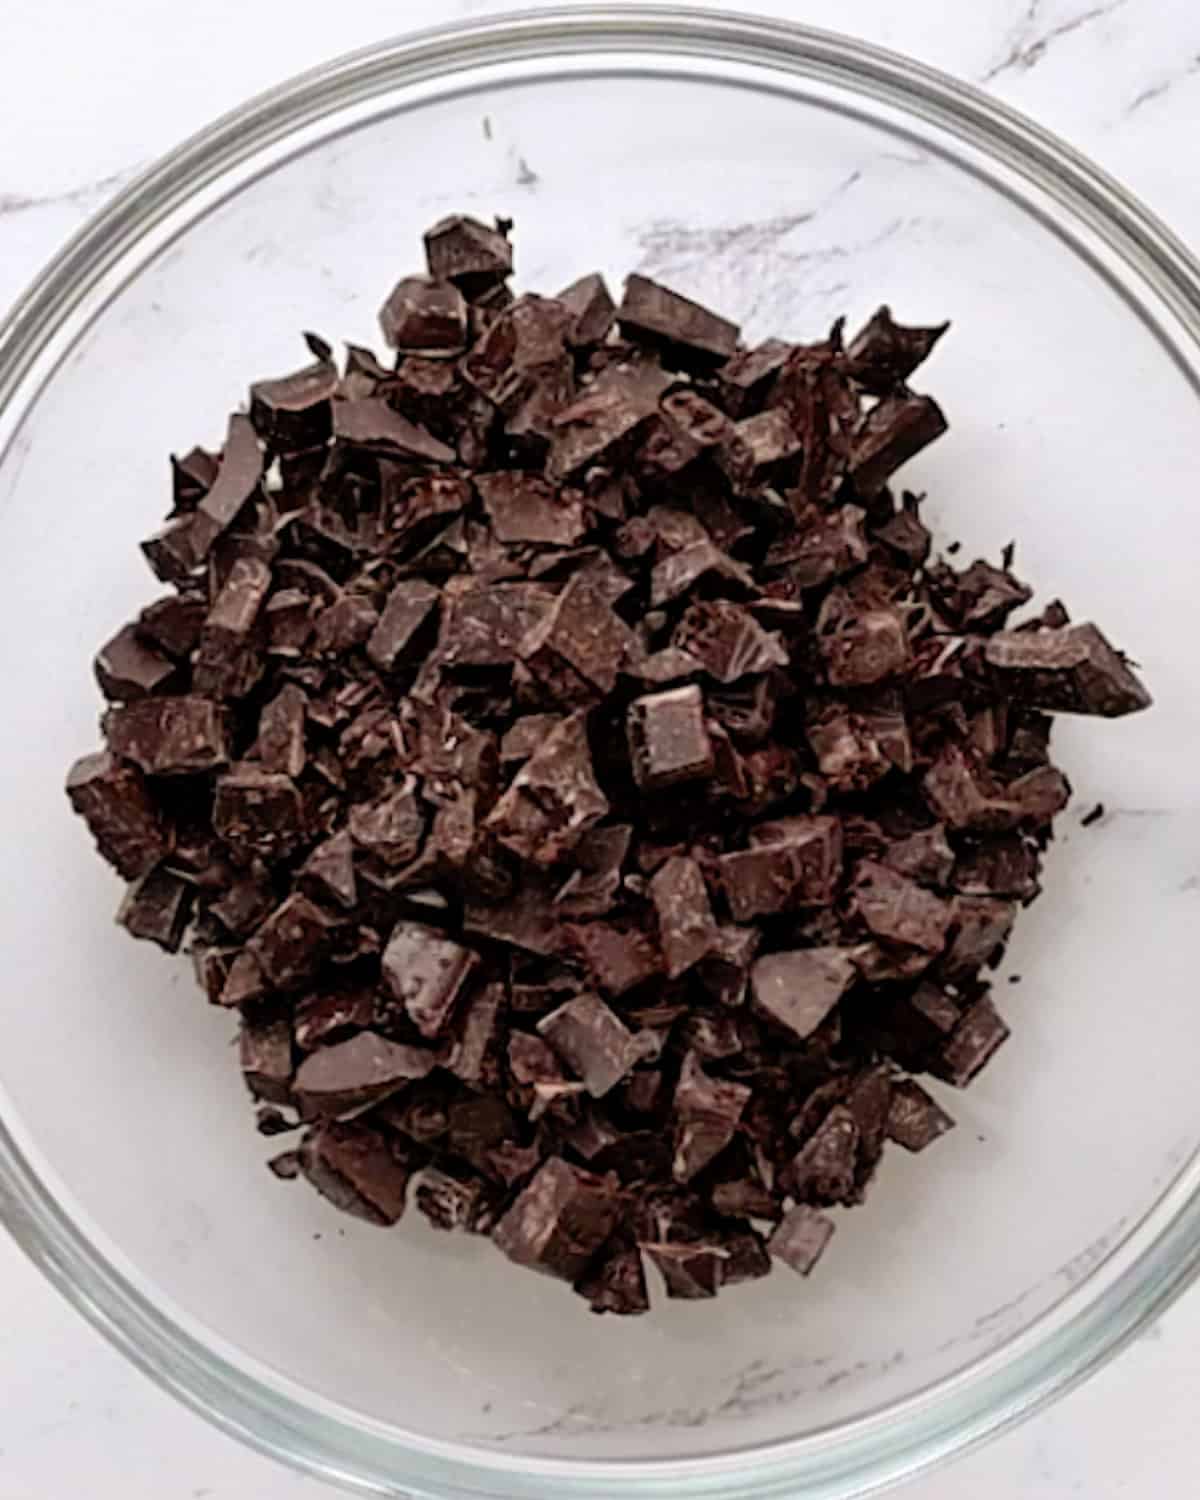 How to Make Chocolate Covered Cashews - chocolate in a bowl before melting